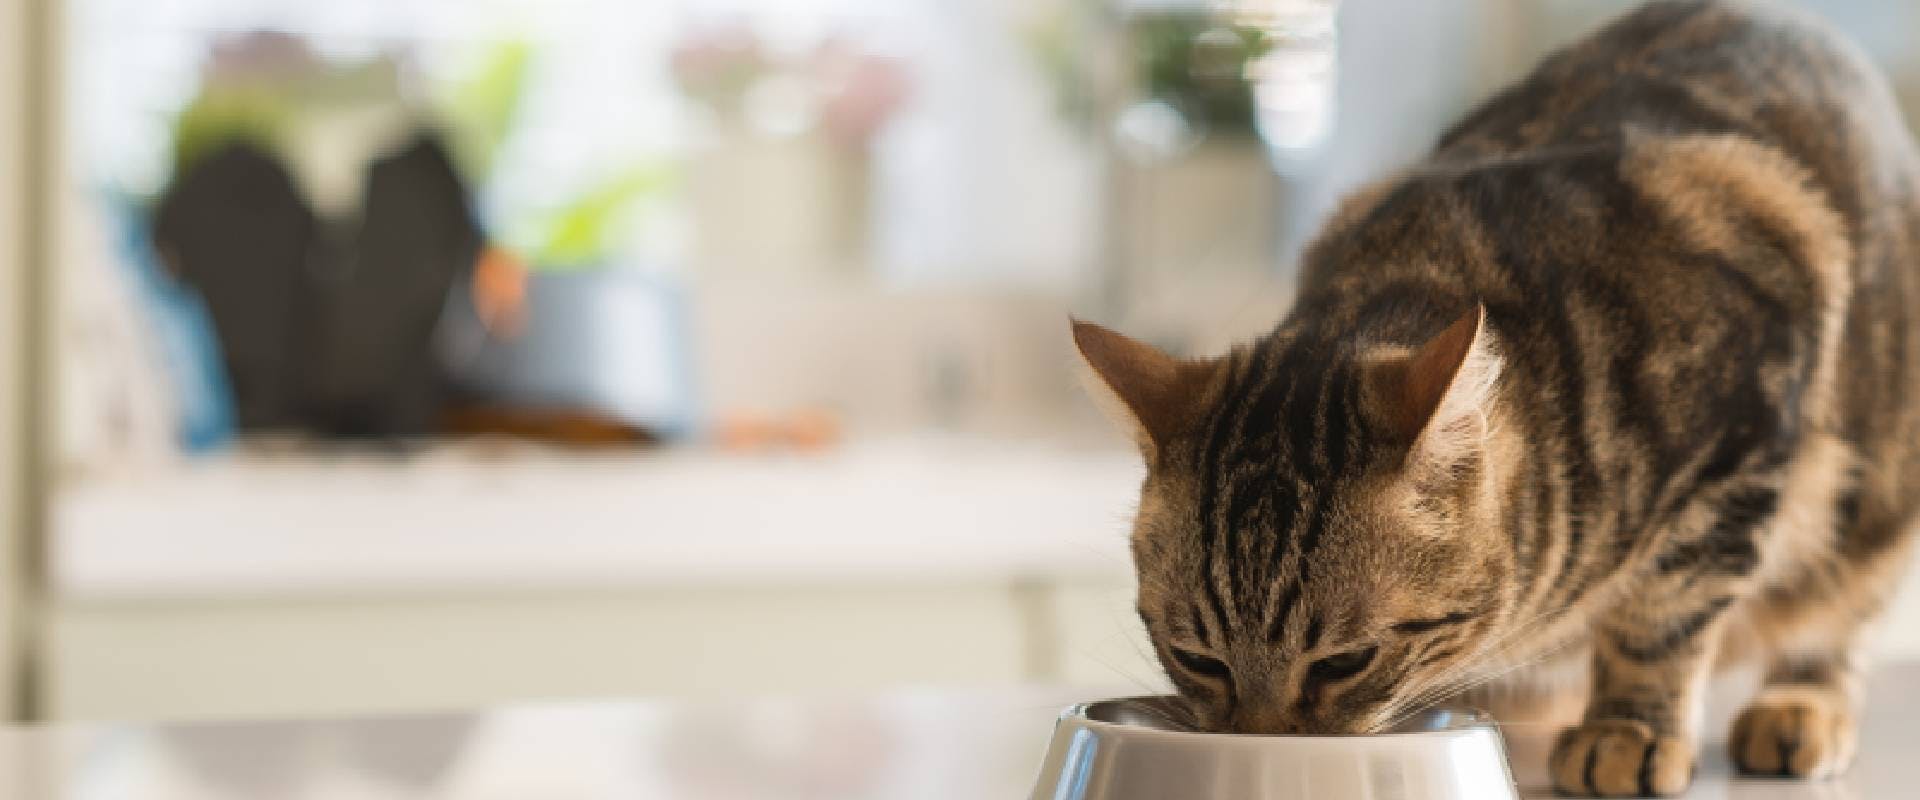 Cat eating from a metal bowl